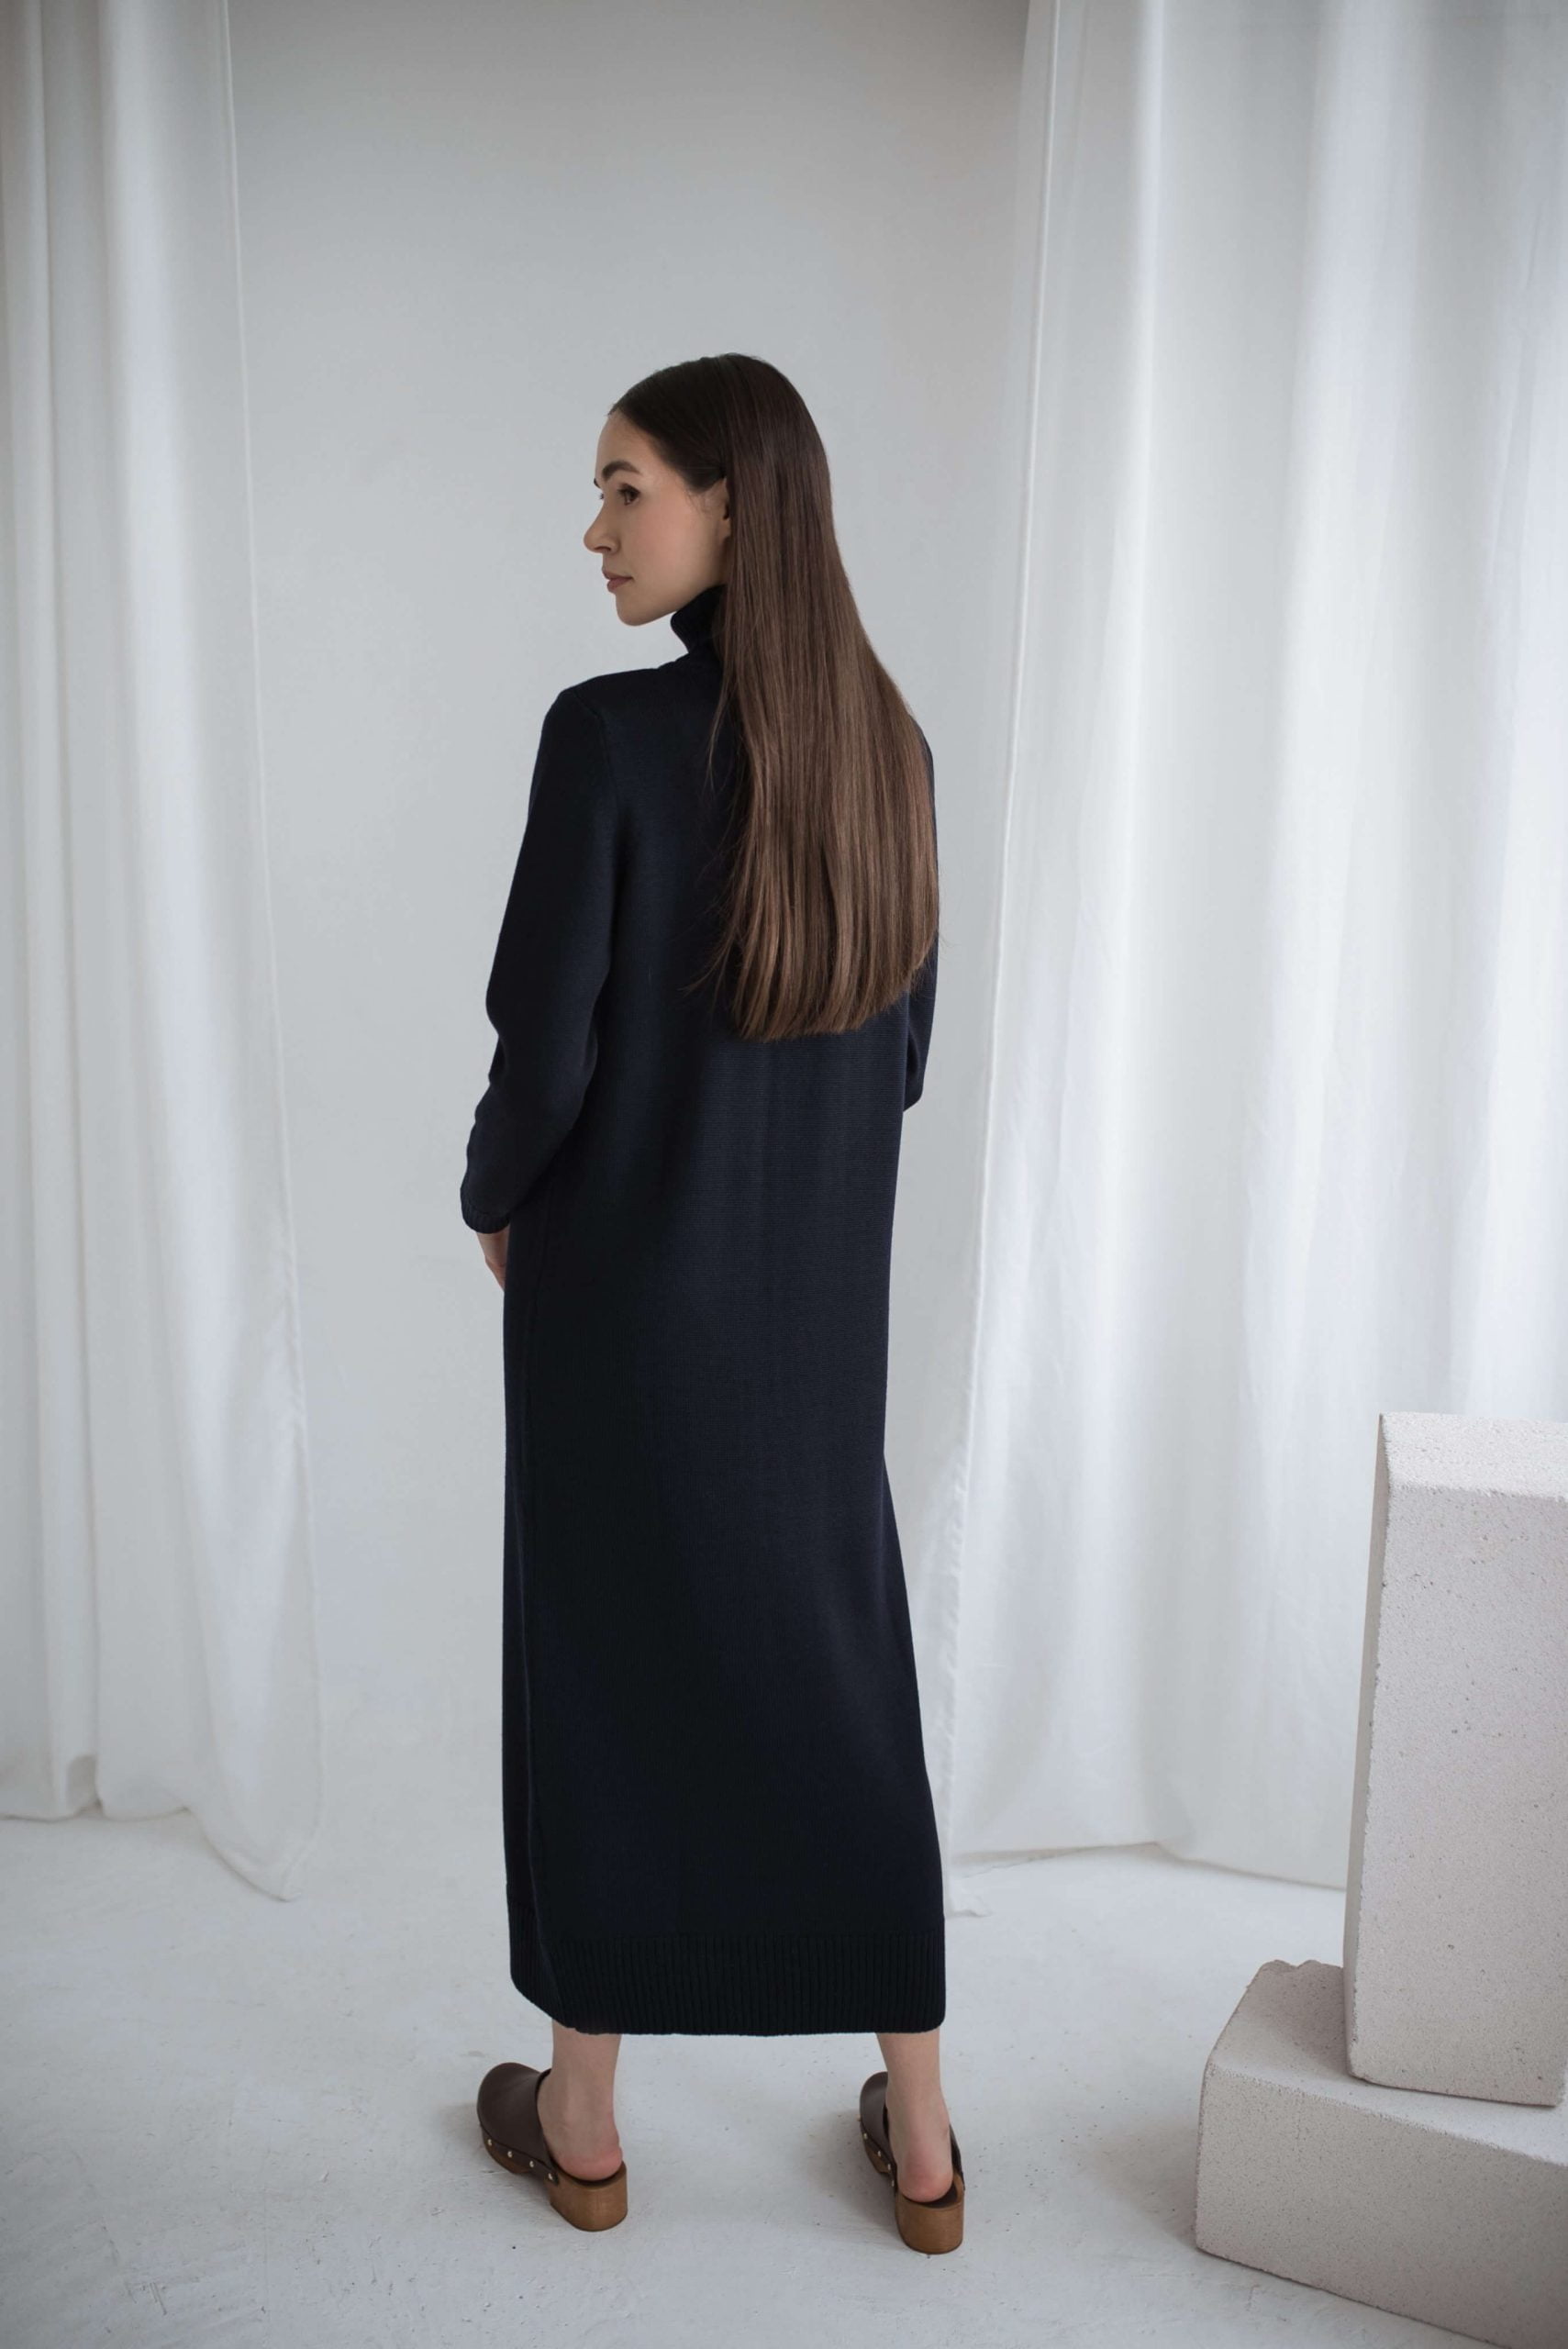 Oversized merino wool dress in black. Roll neck and ribbed cuffs.